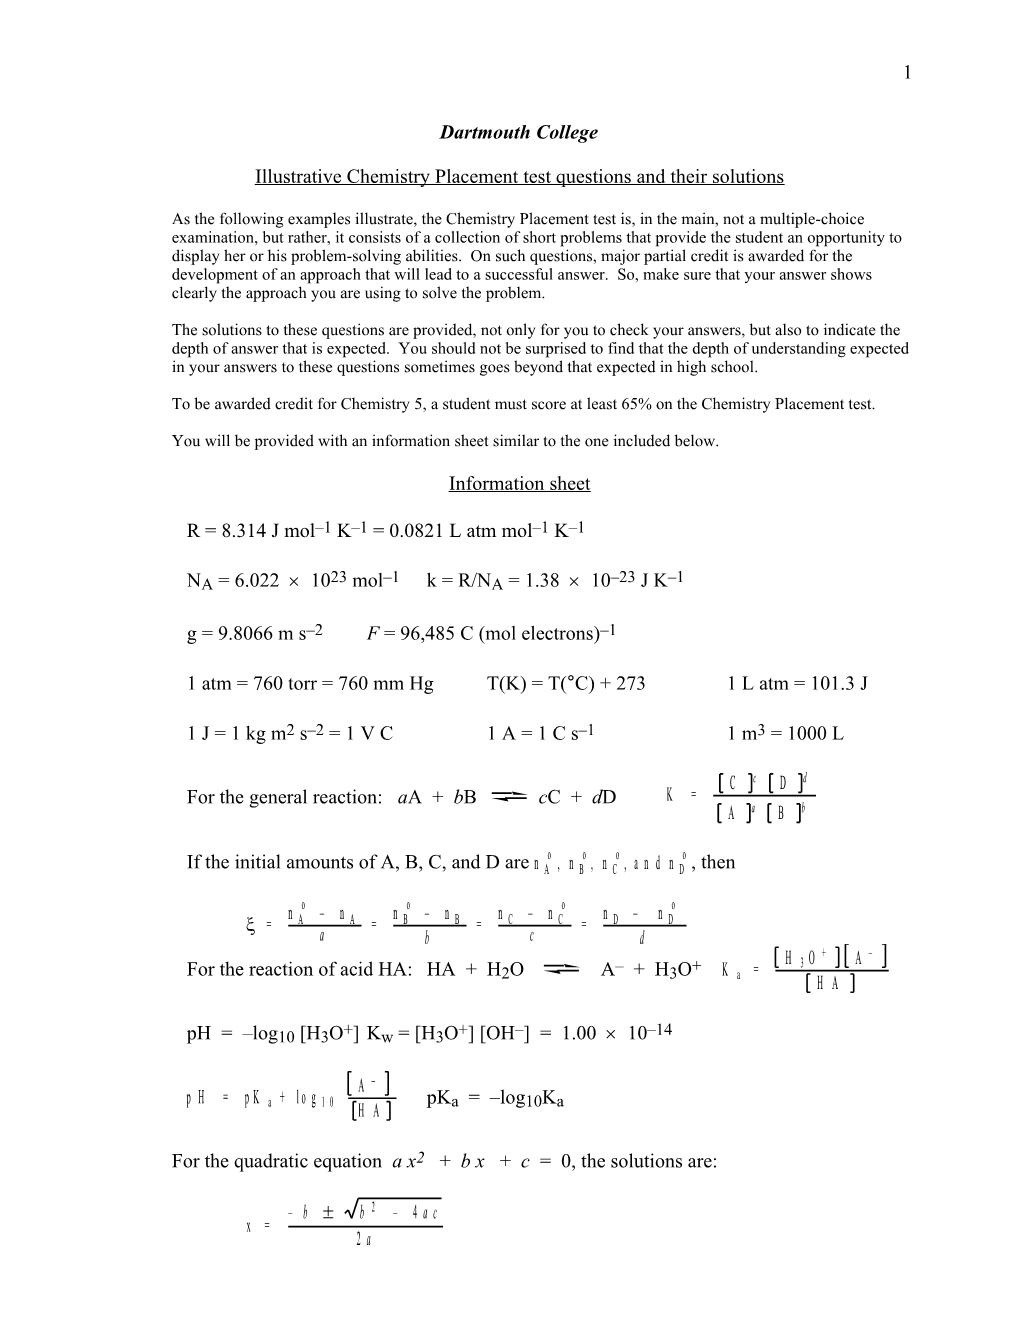 Illustrative Chemistry Placement Test Questions and Their Solutions